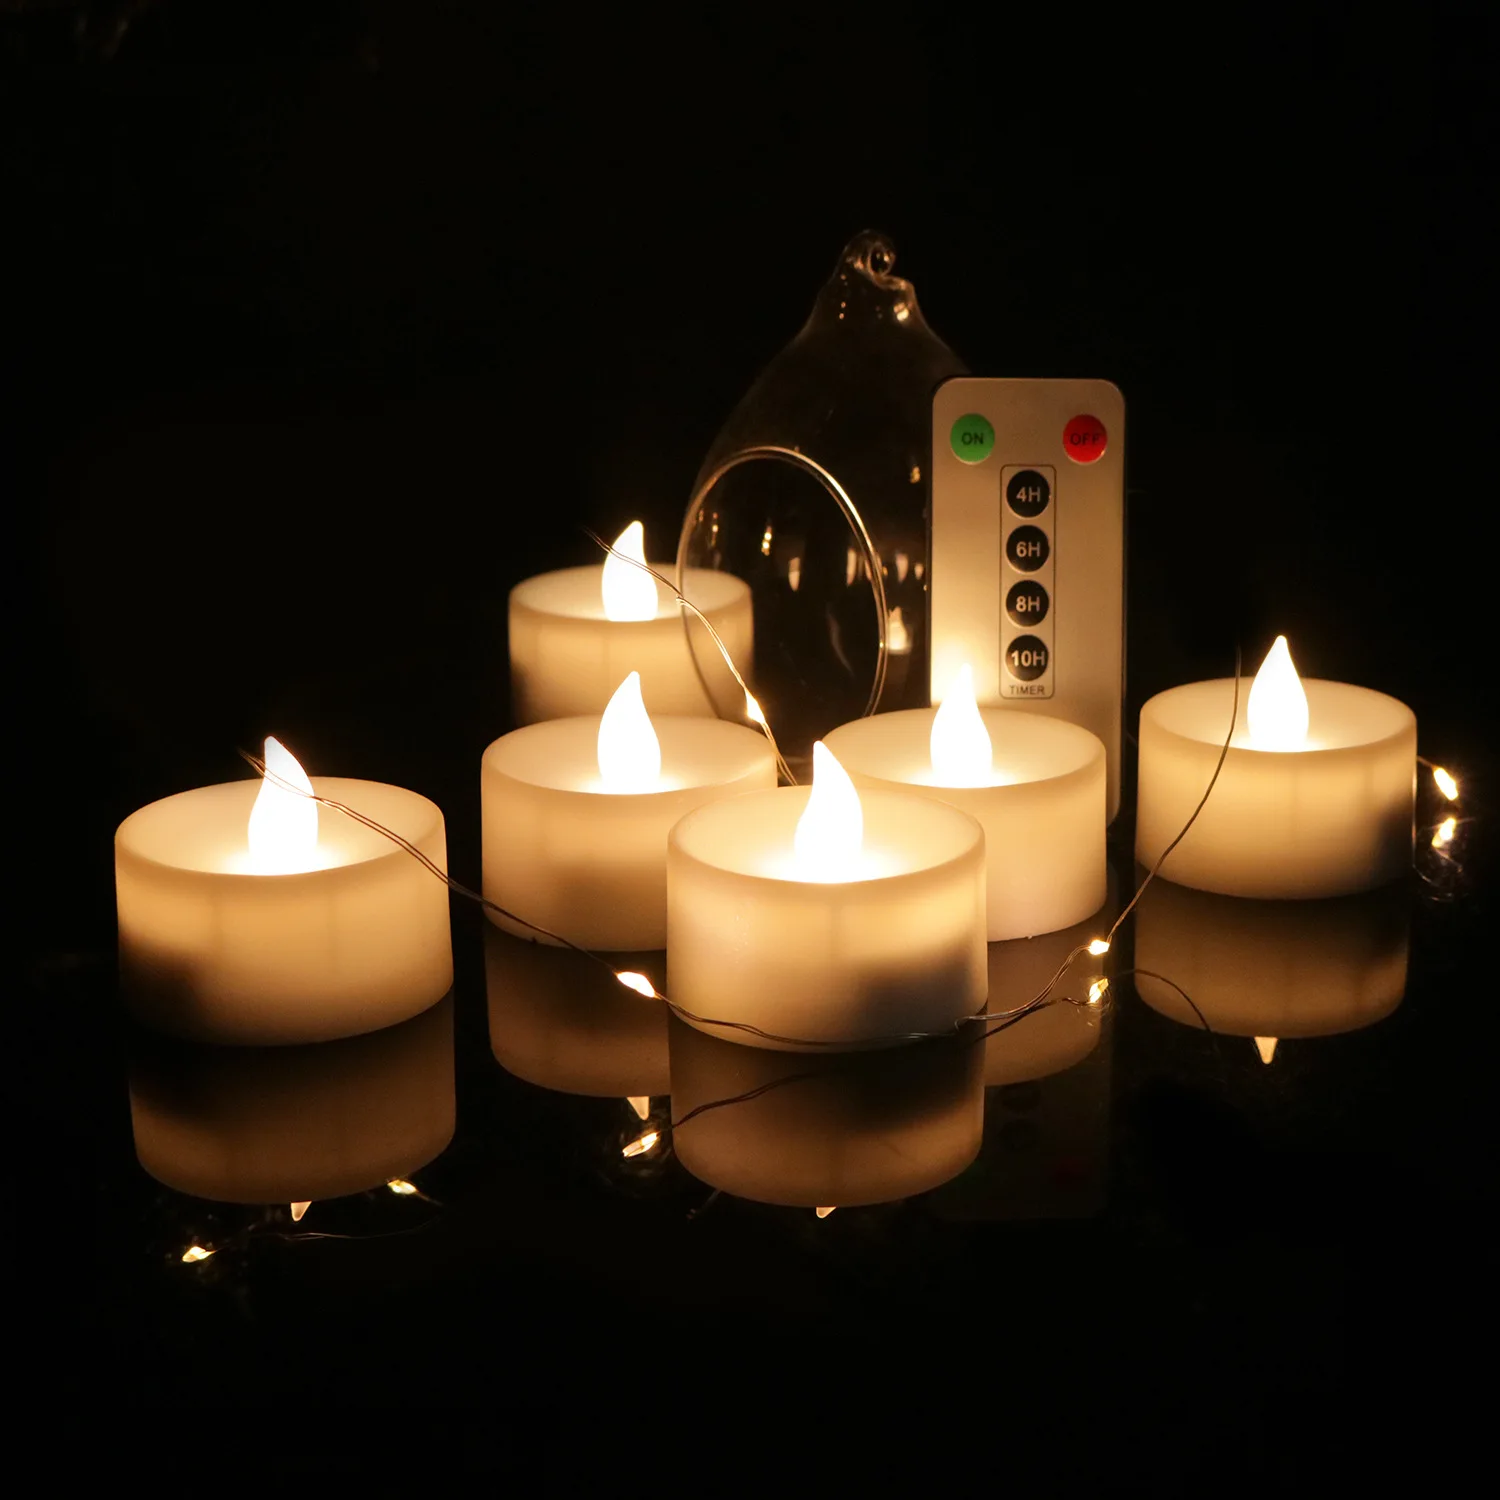 

6pcs LED Flameless Candles Light Remote Control Tea Lights Flickering Battery Powered Tealights For Home Decor Holiday Wedding